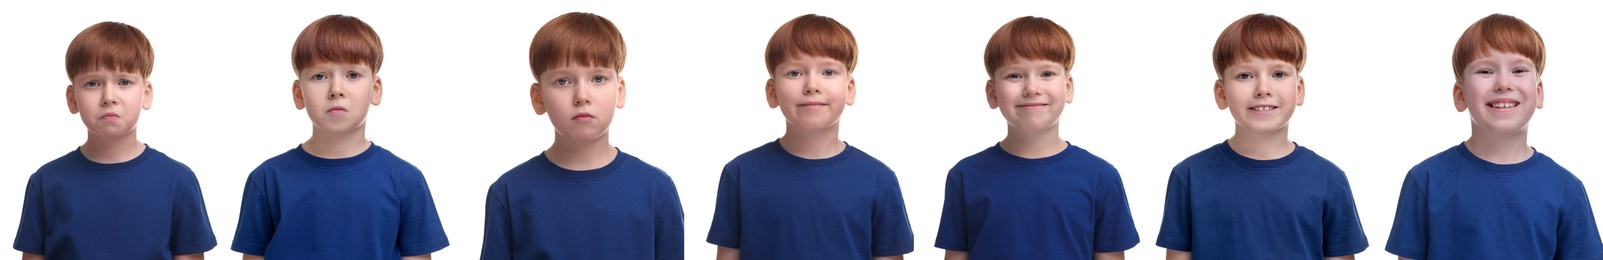 Image of Boy showing different emotions on white background, collage of photos